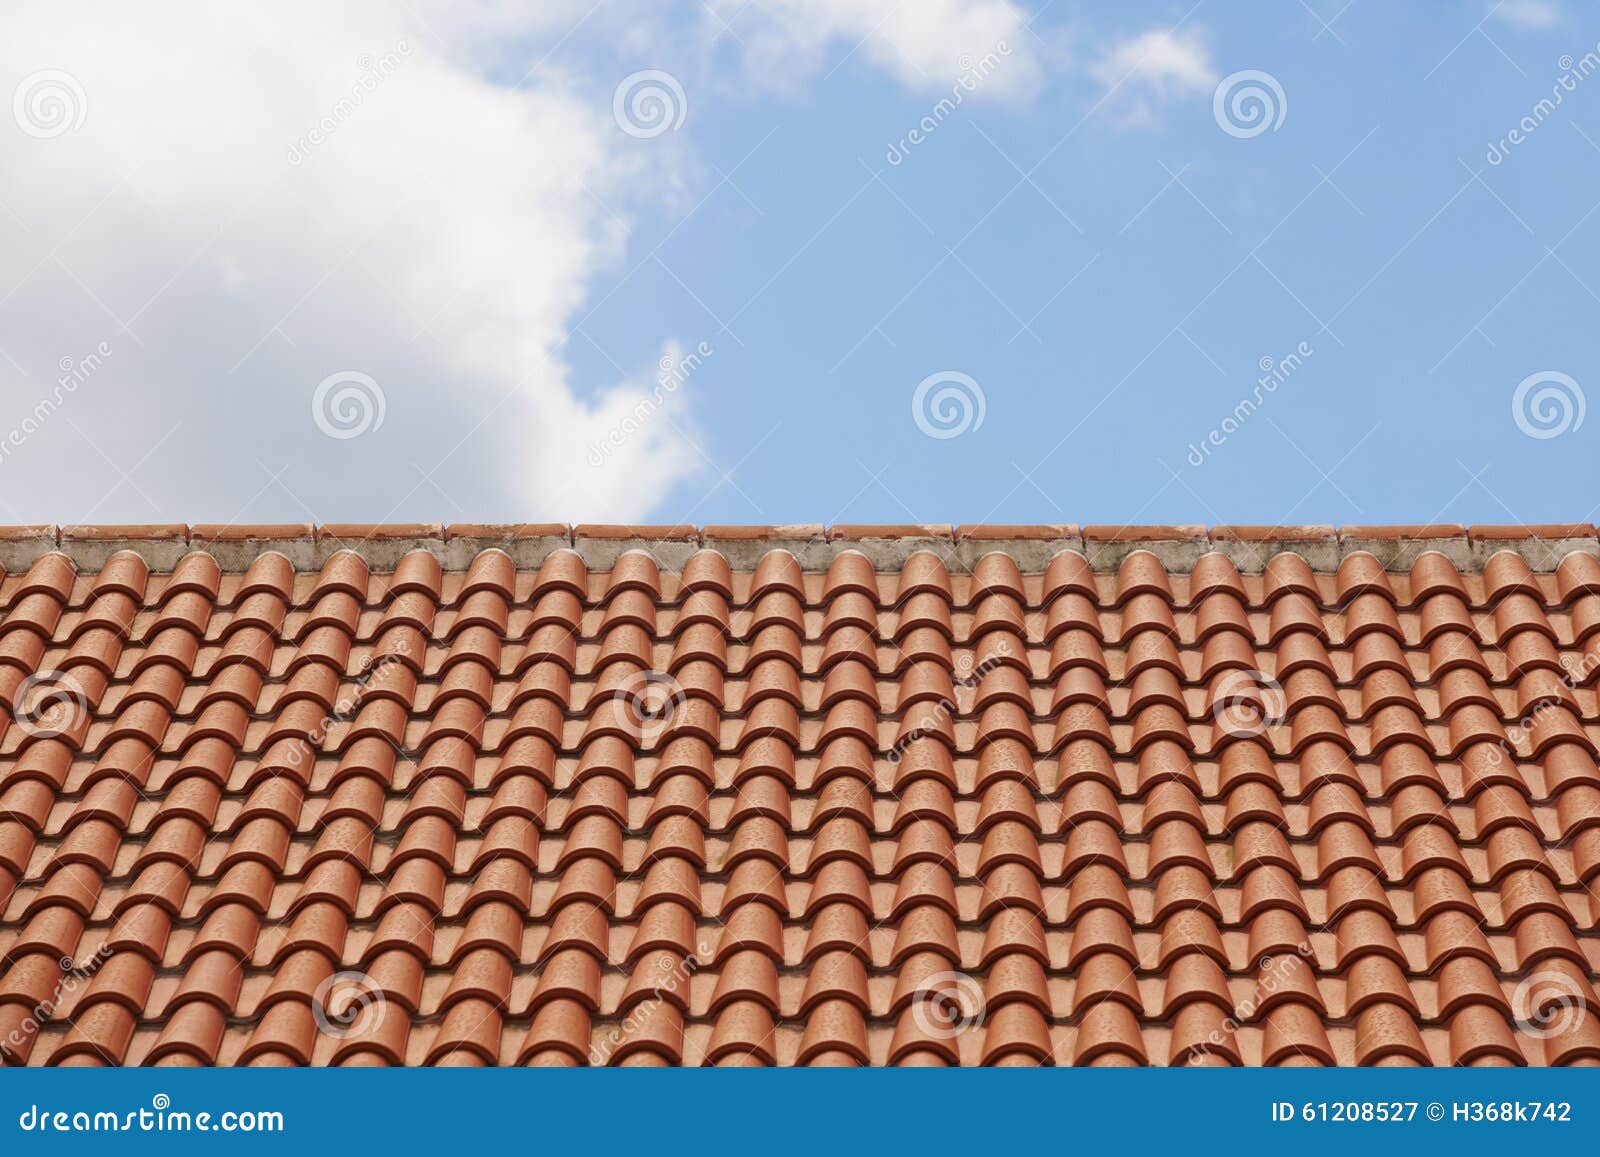 Orange Tile Roof Over a Blue Sky Stock Image - Image of roofs, exterior